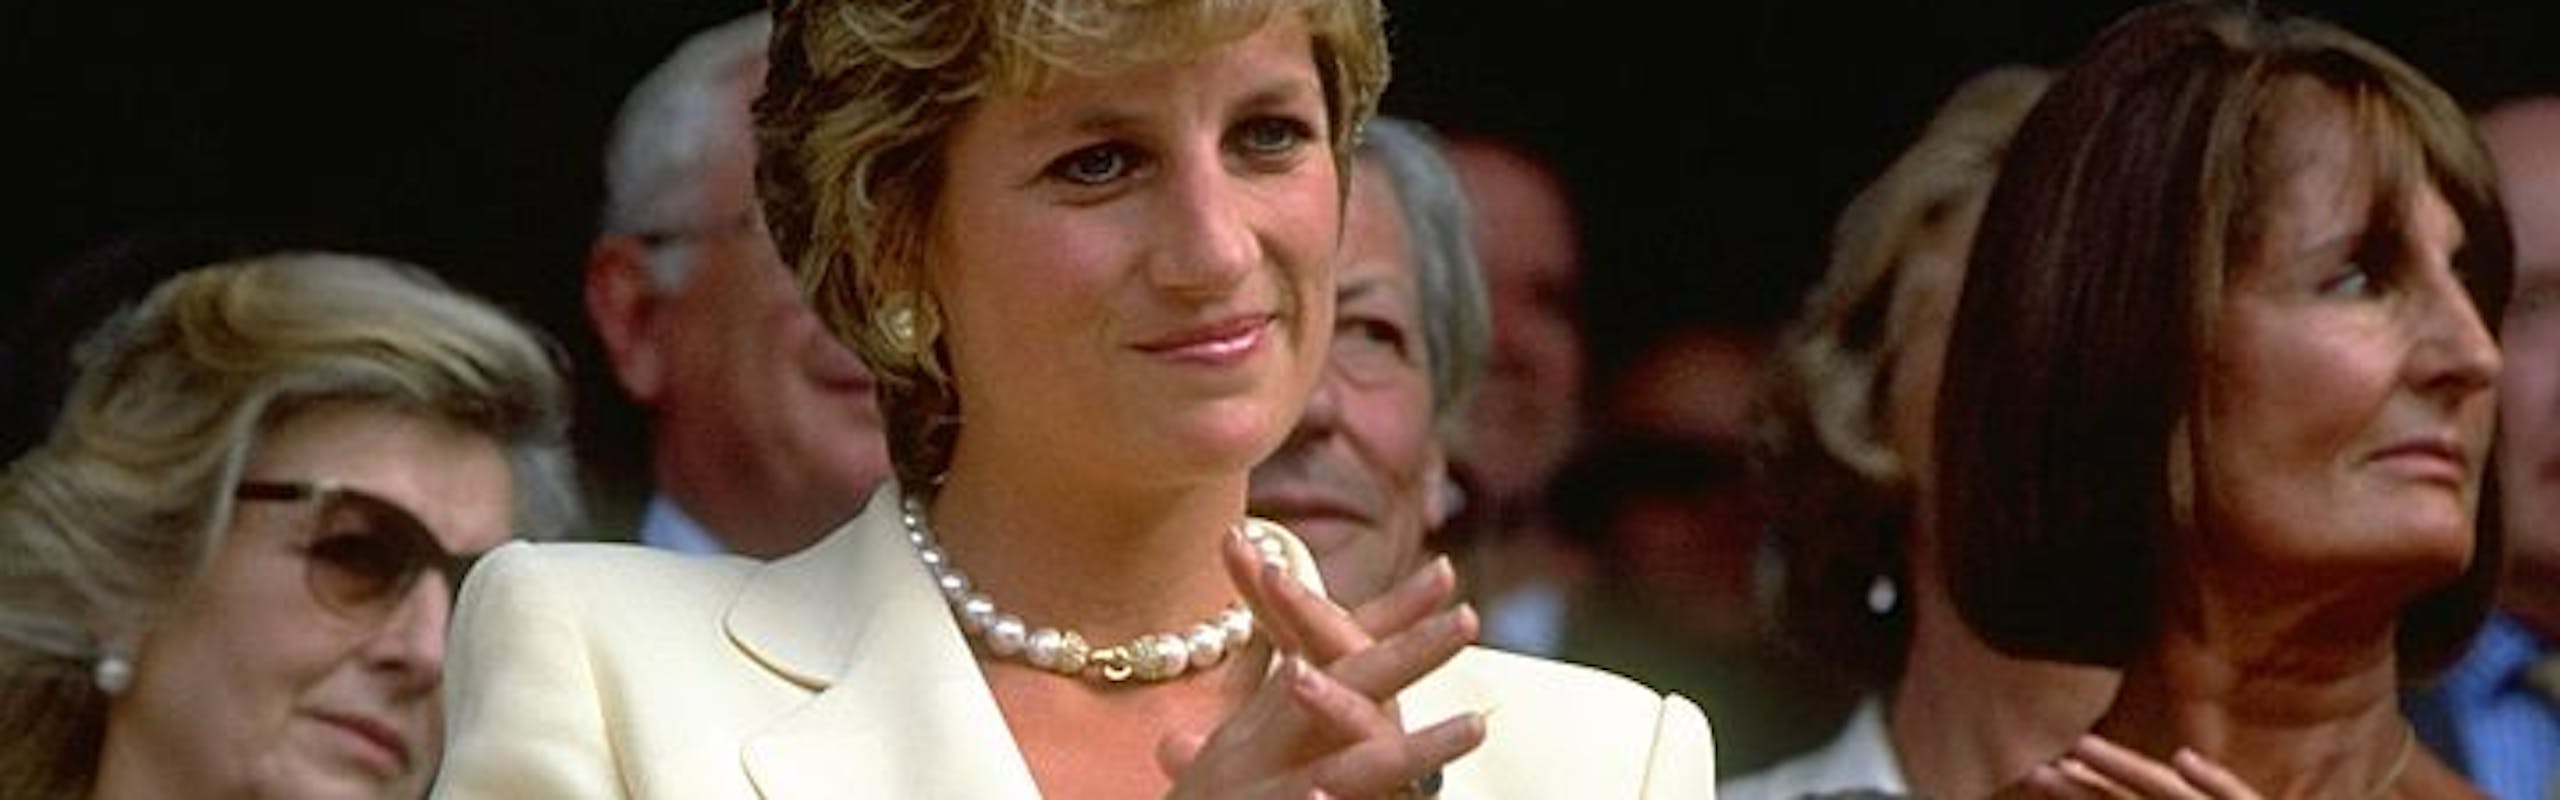 Portrait of Diana, Princess of Wales during the Lawn Tennis Championships at Wimbledon in 1995 in a yellow suit. Getty Images.